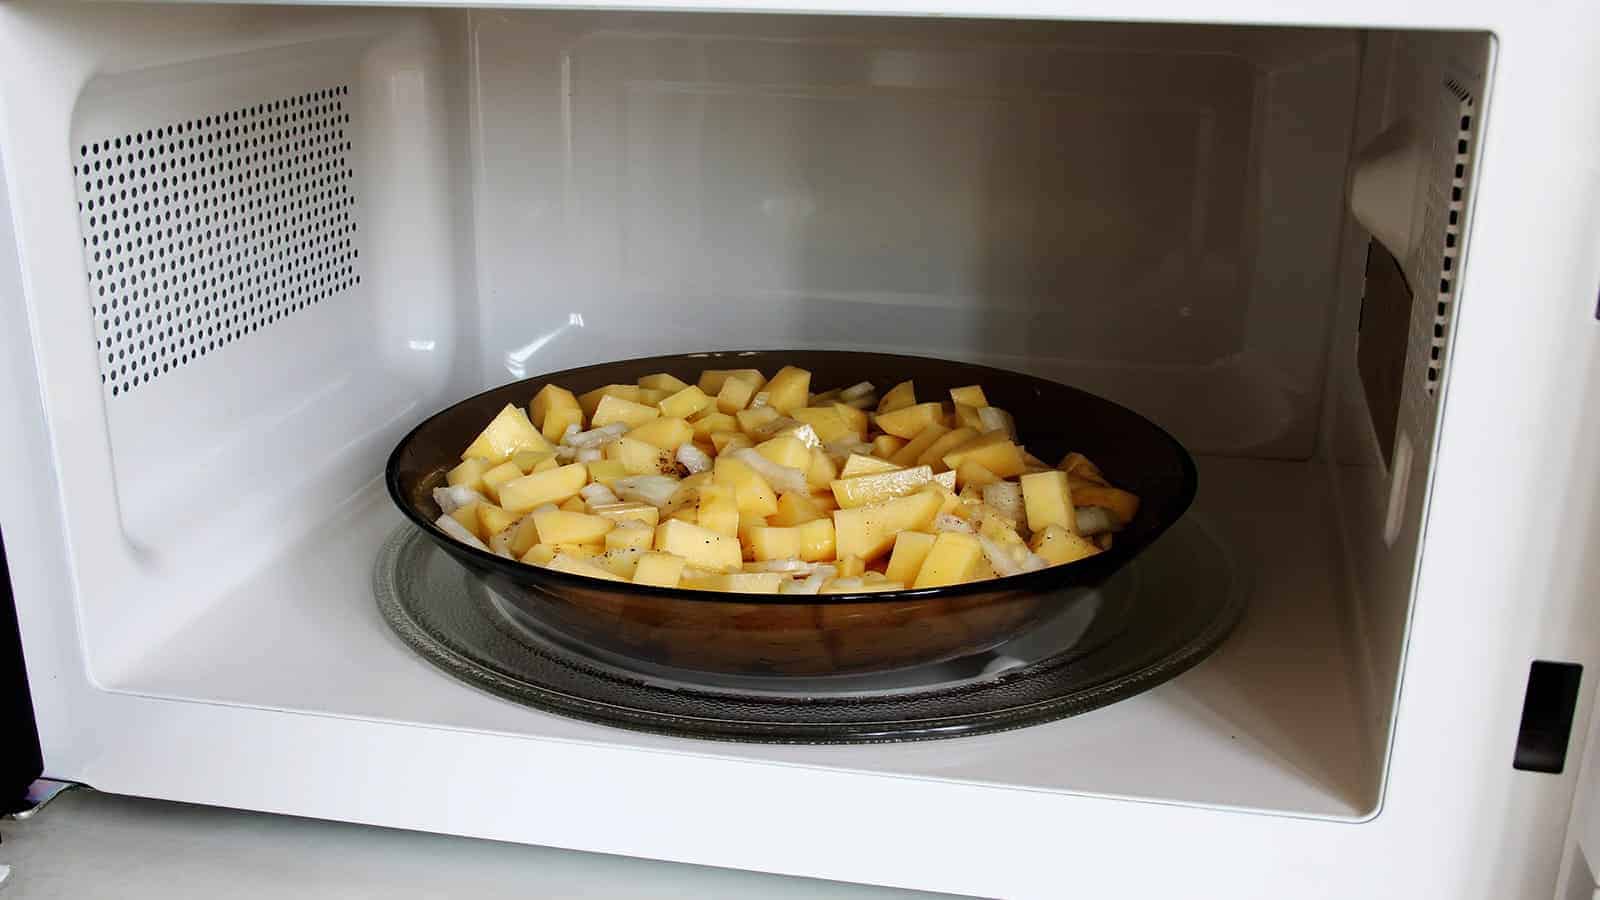 13 Foods To Never Reheat In A Microwave